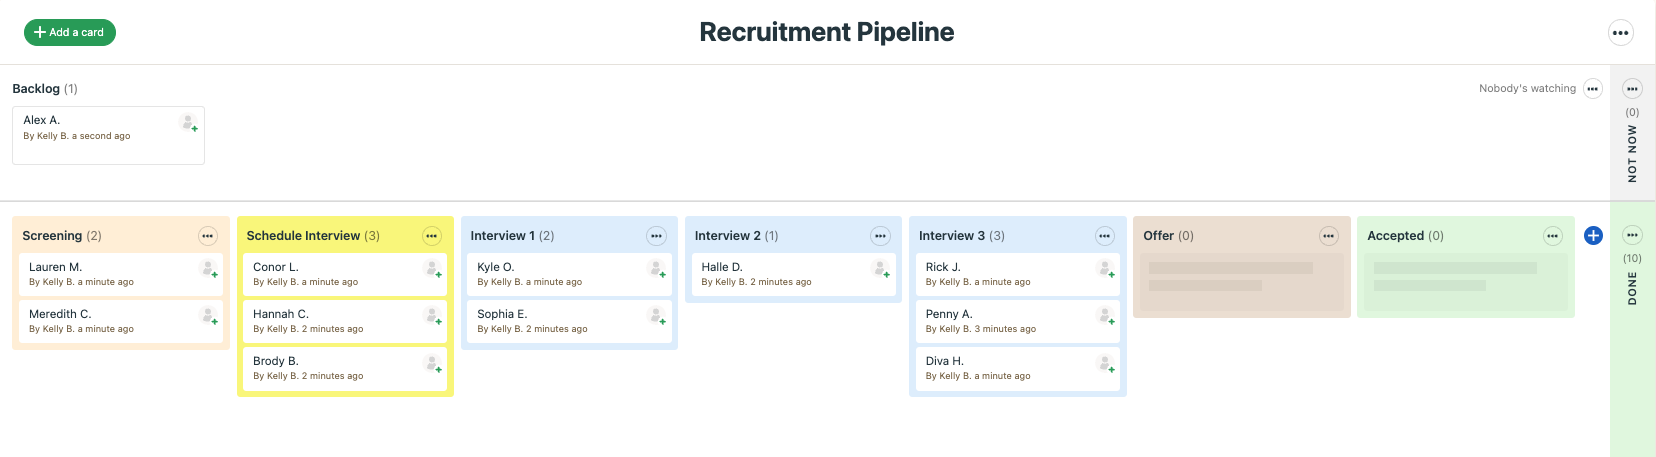 Moving candidates through your recruitment pipeline is as simple as sliding a card